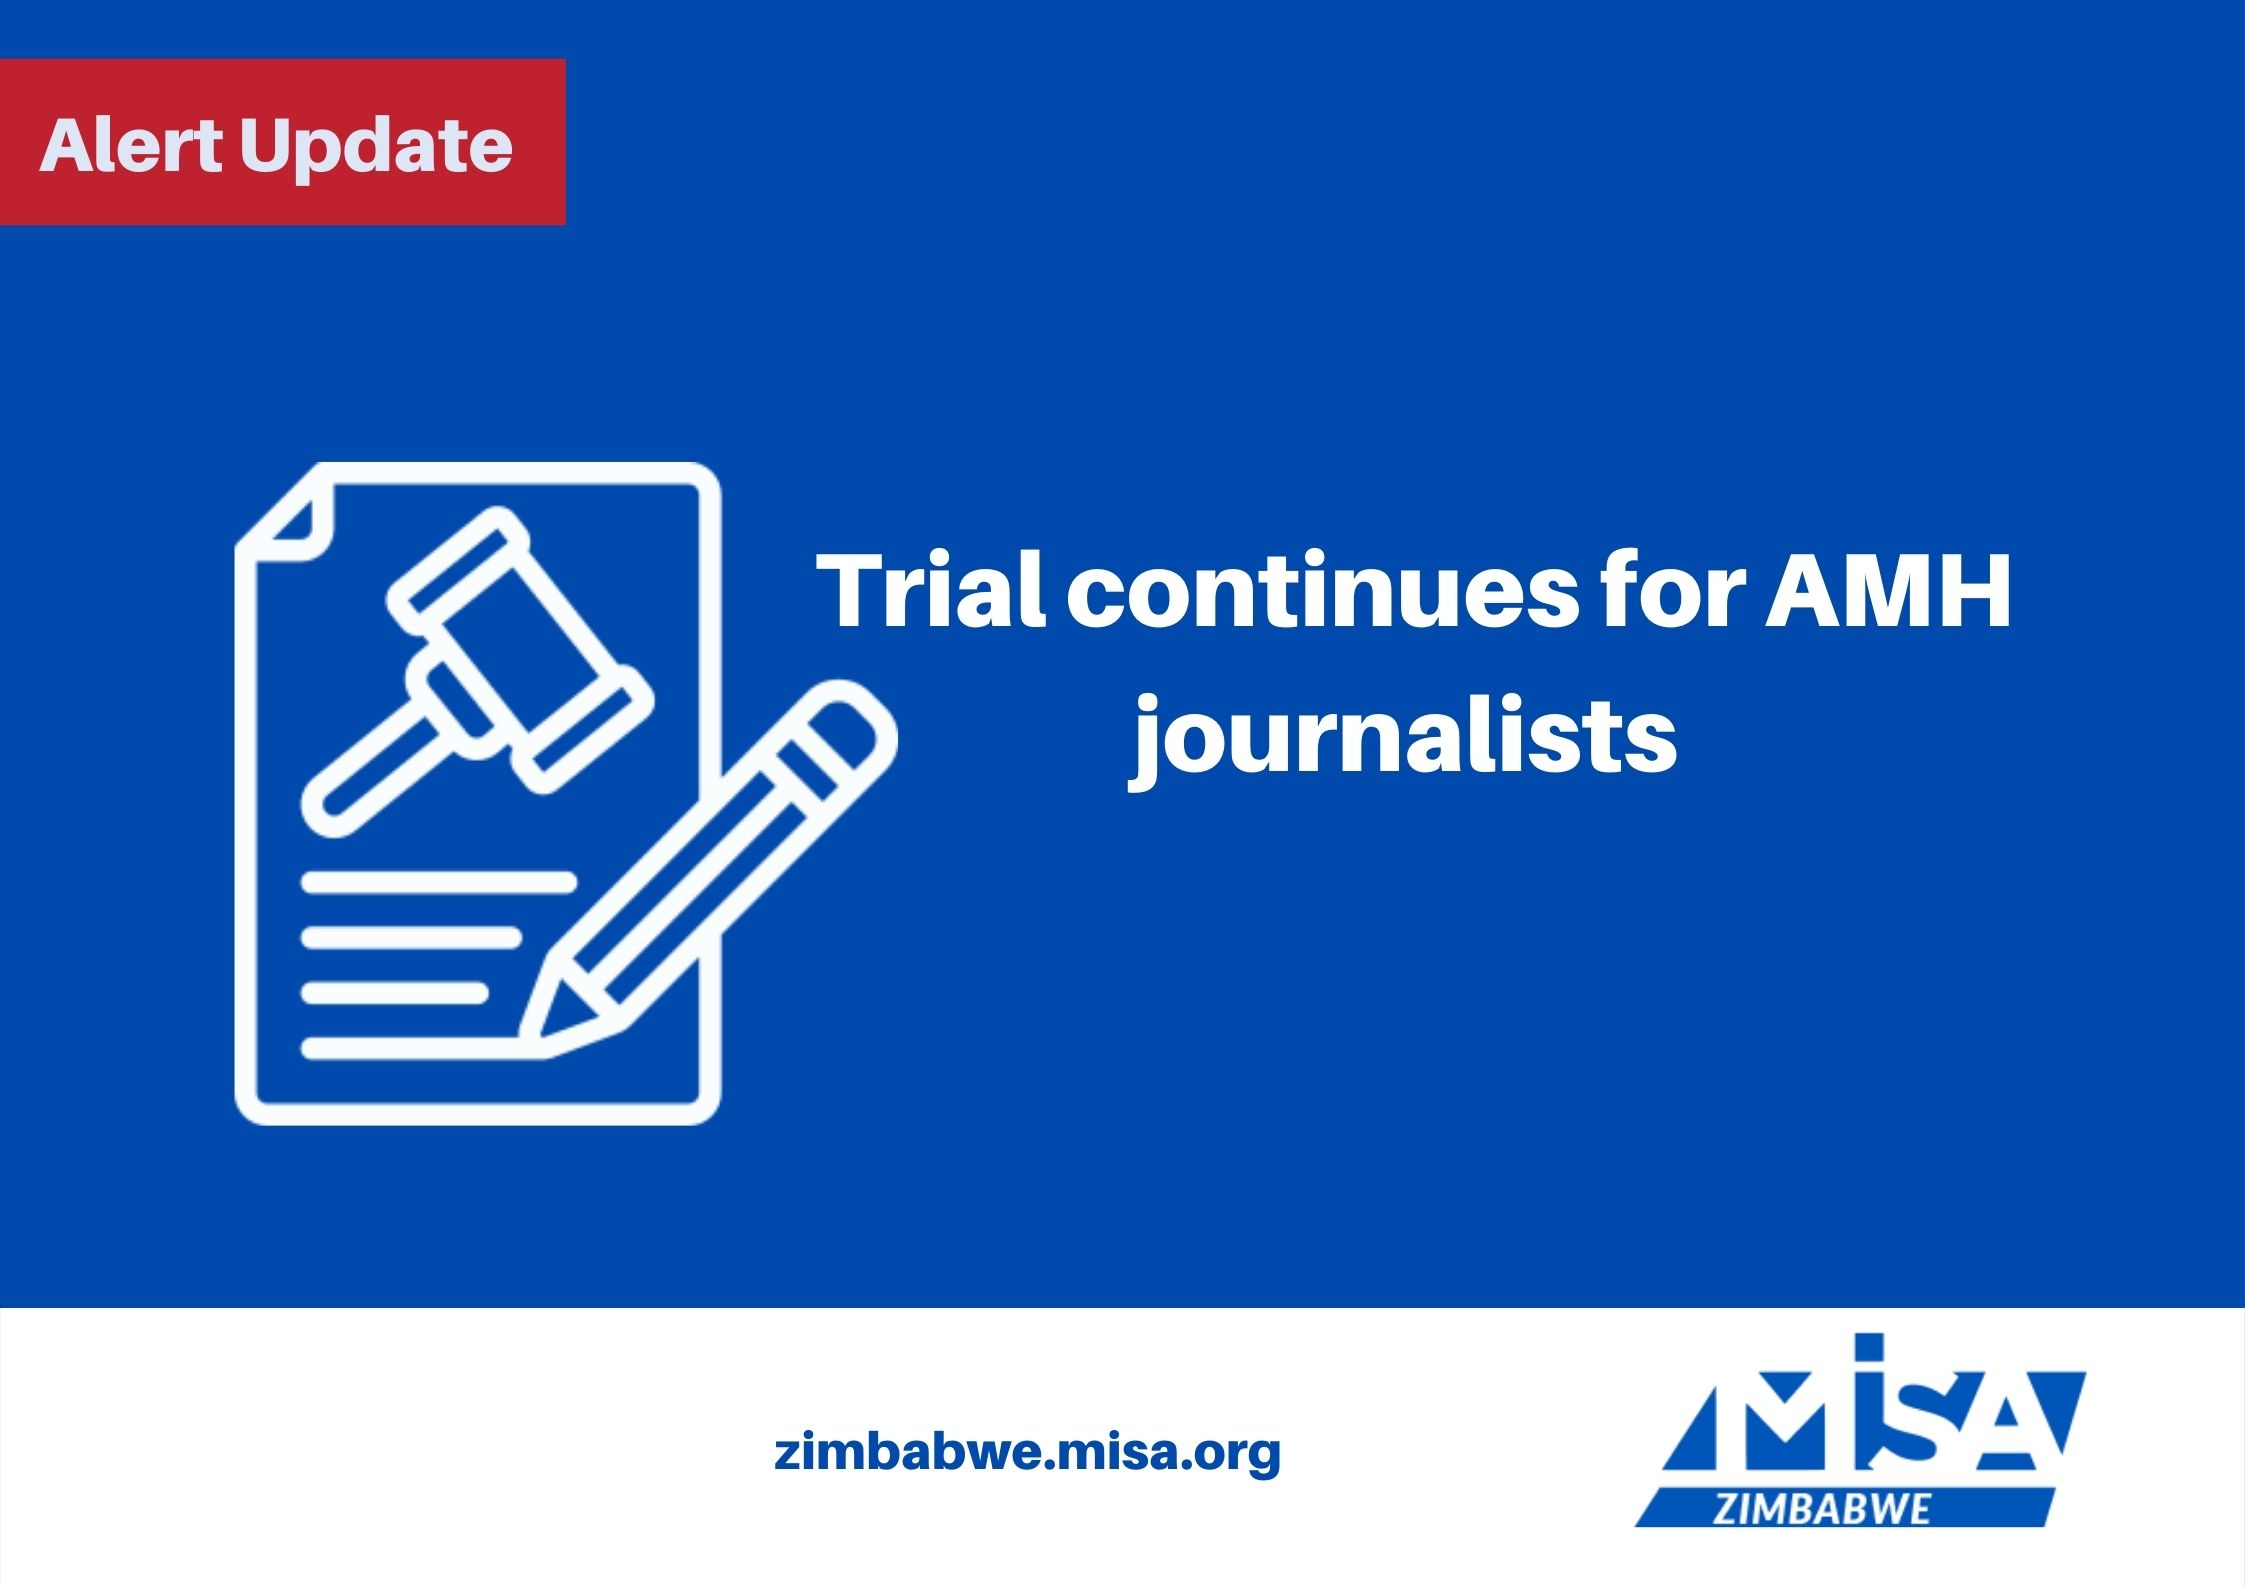 Trial continues for AMH journalists